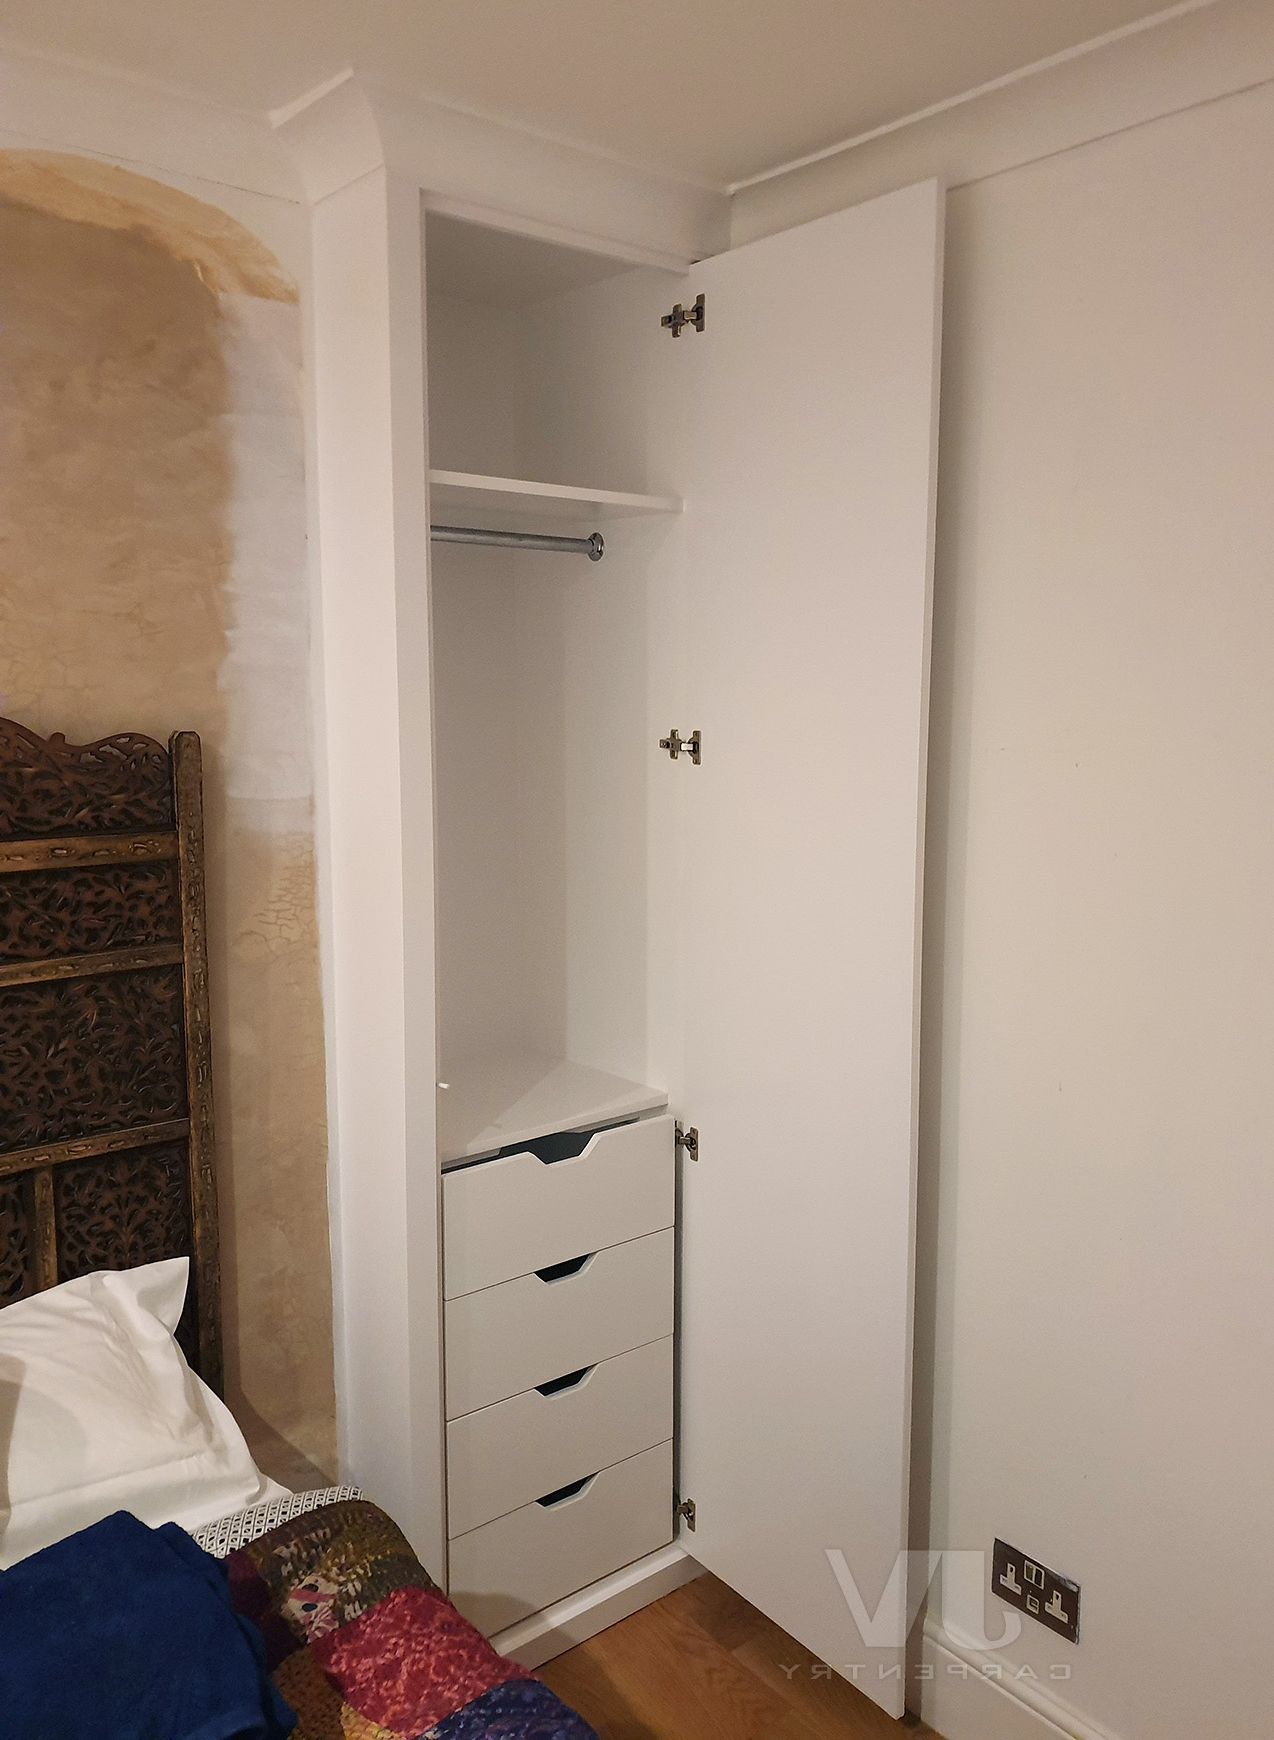 14 Fitted Wardrobe Ideas For A Small Bedroom | Jv Carpentry Throughout Small Single Wardrobes (View 16 of 20)